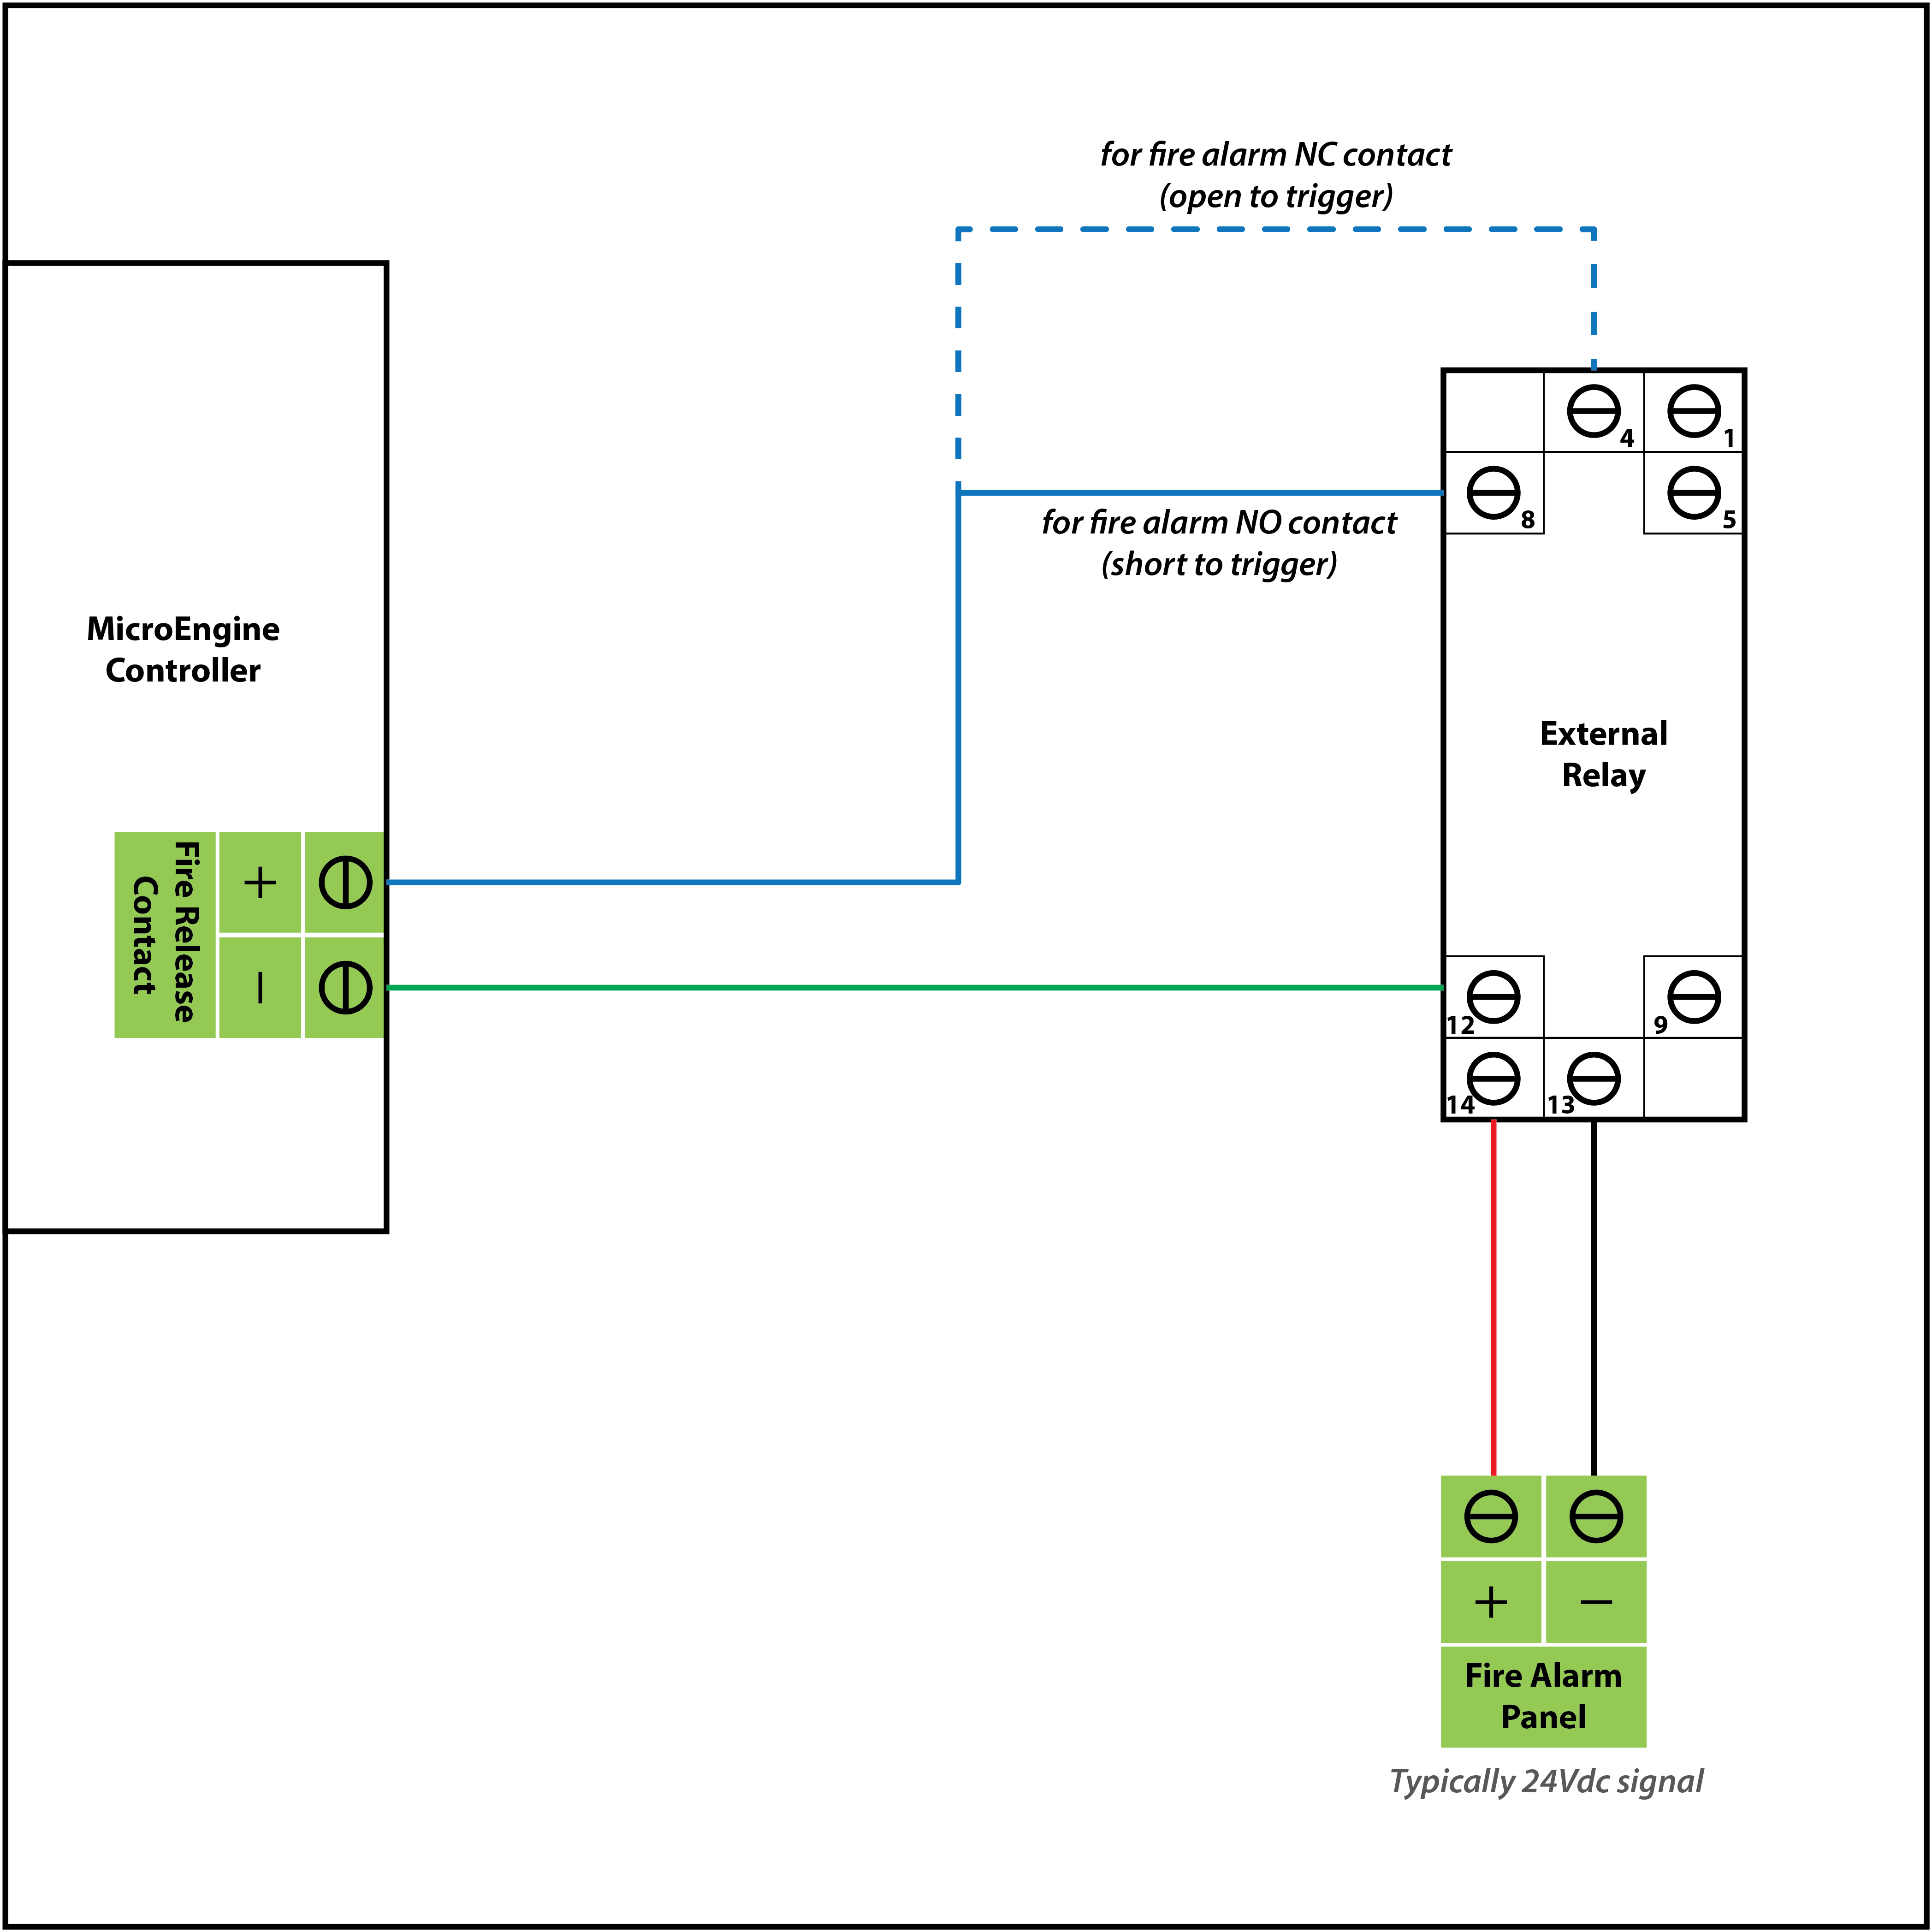 Connecting 24Vdc Fire Alarm Signal to General MicroEngine Controllers Using External Relays